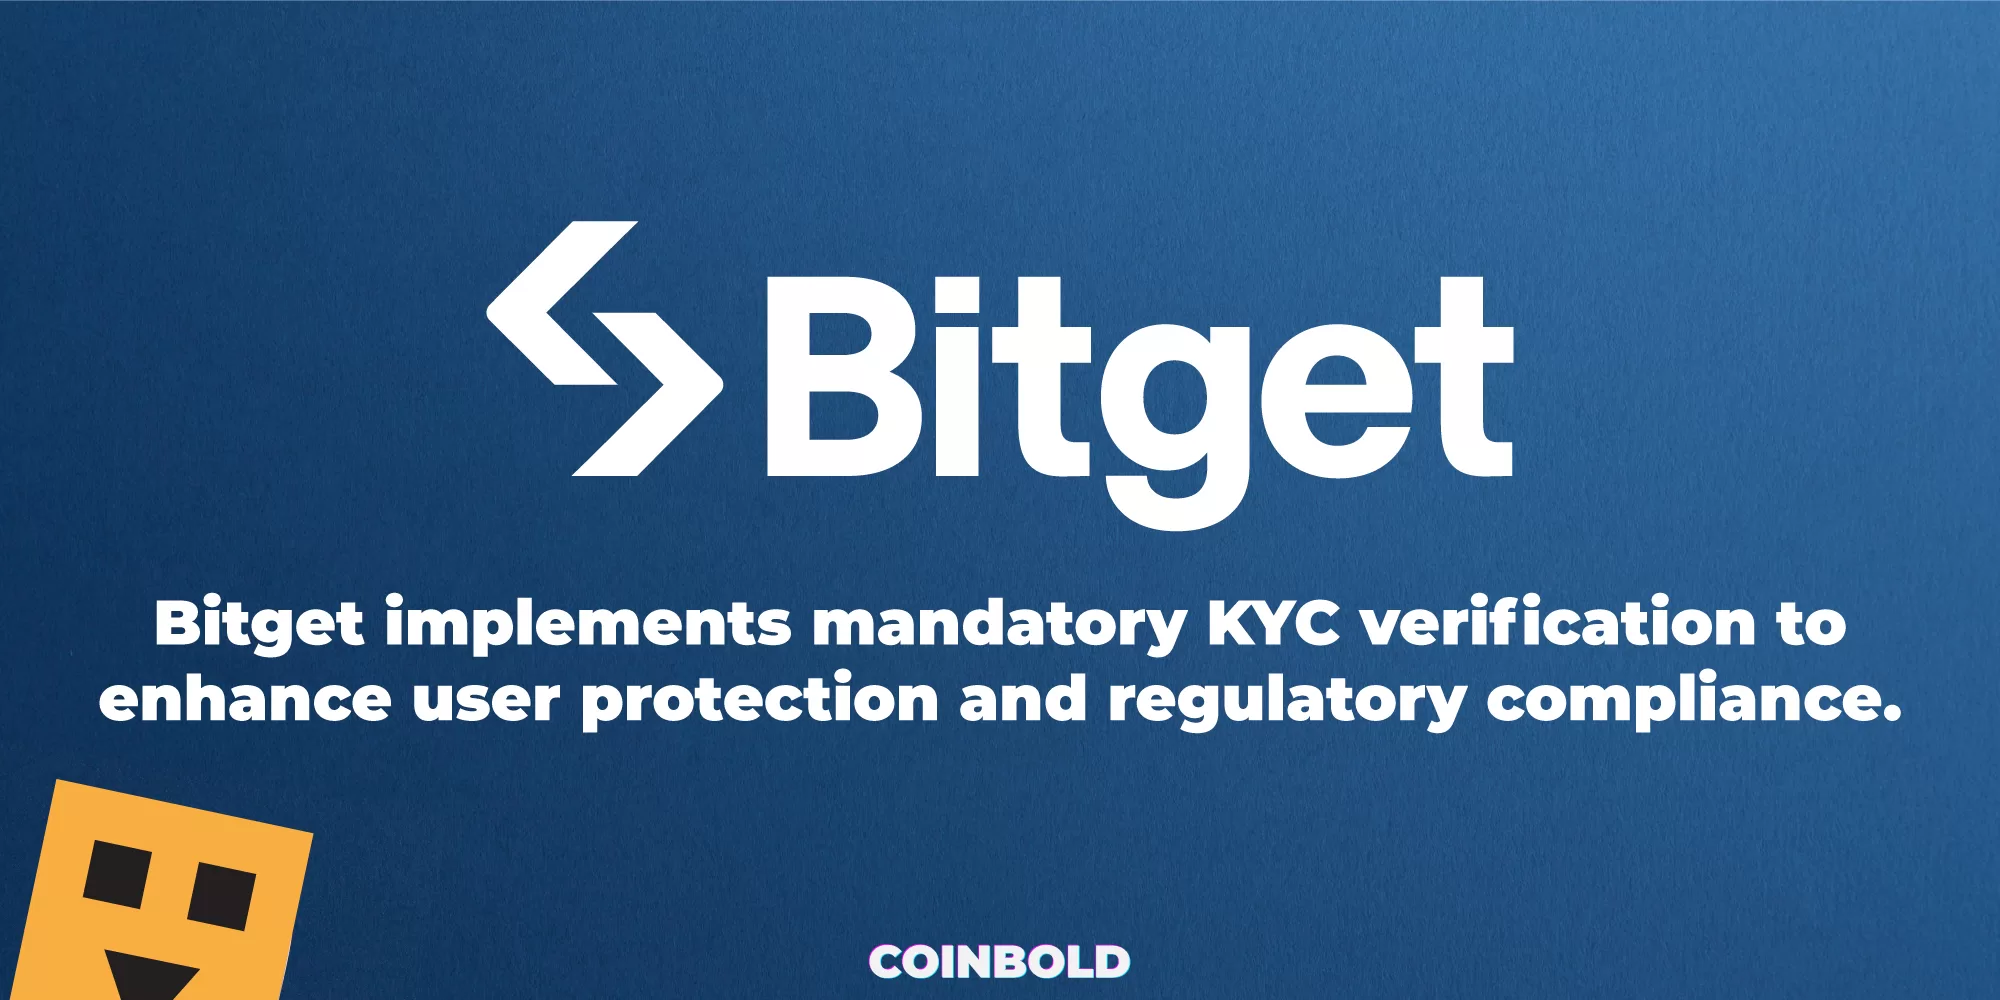 Bitget implements mandatory KYC verification to enhance user protection and regulatory compliance